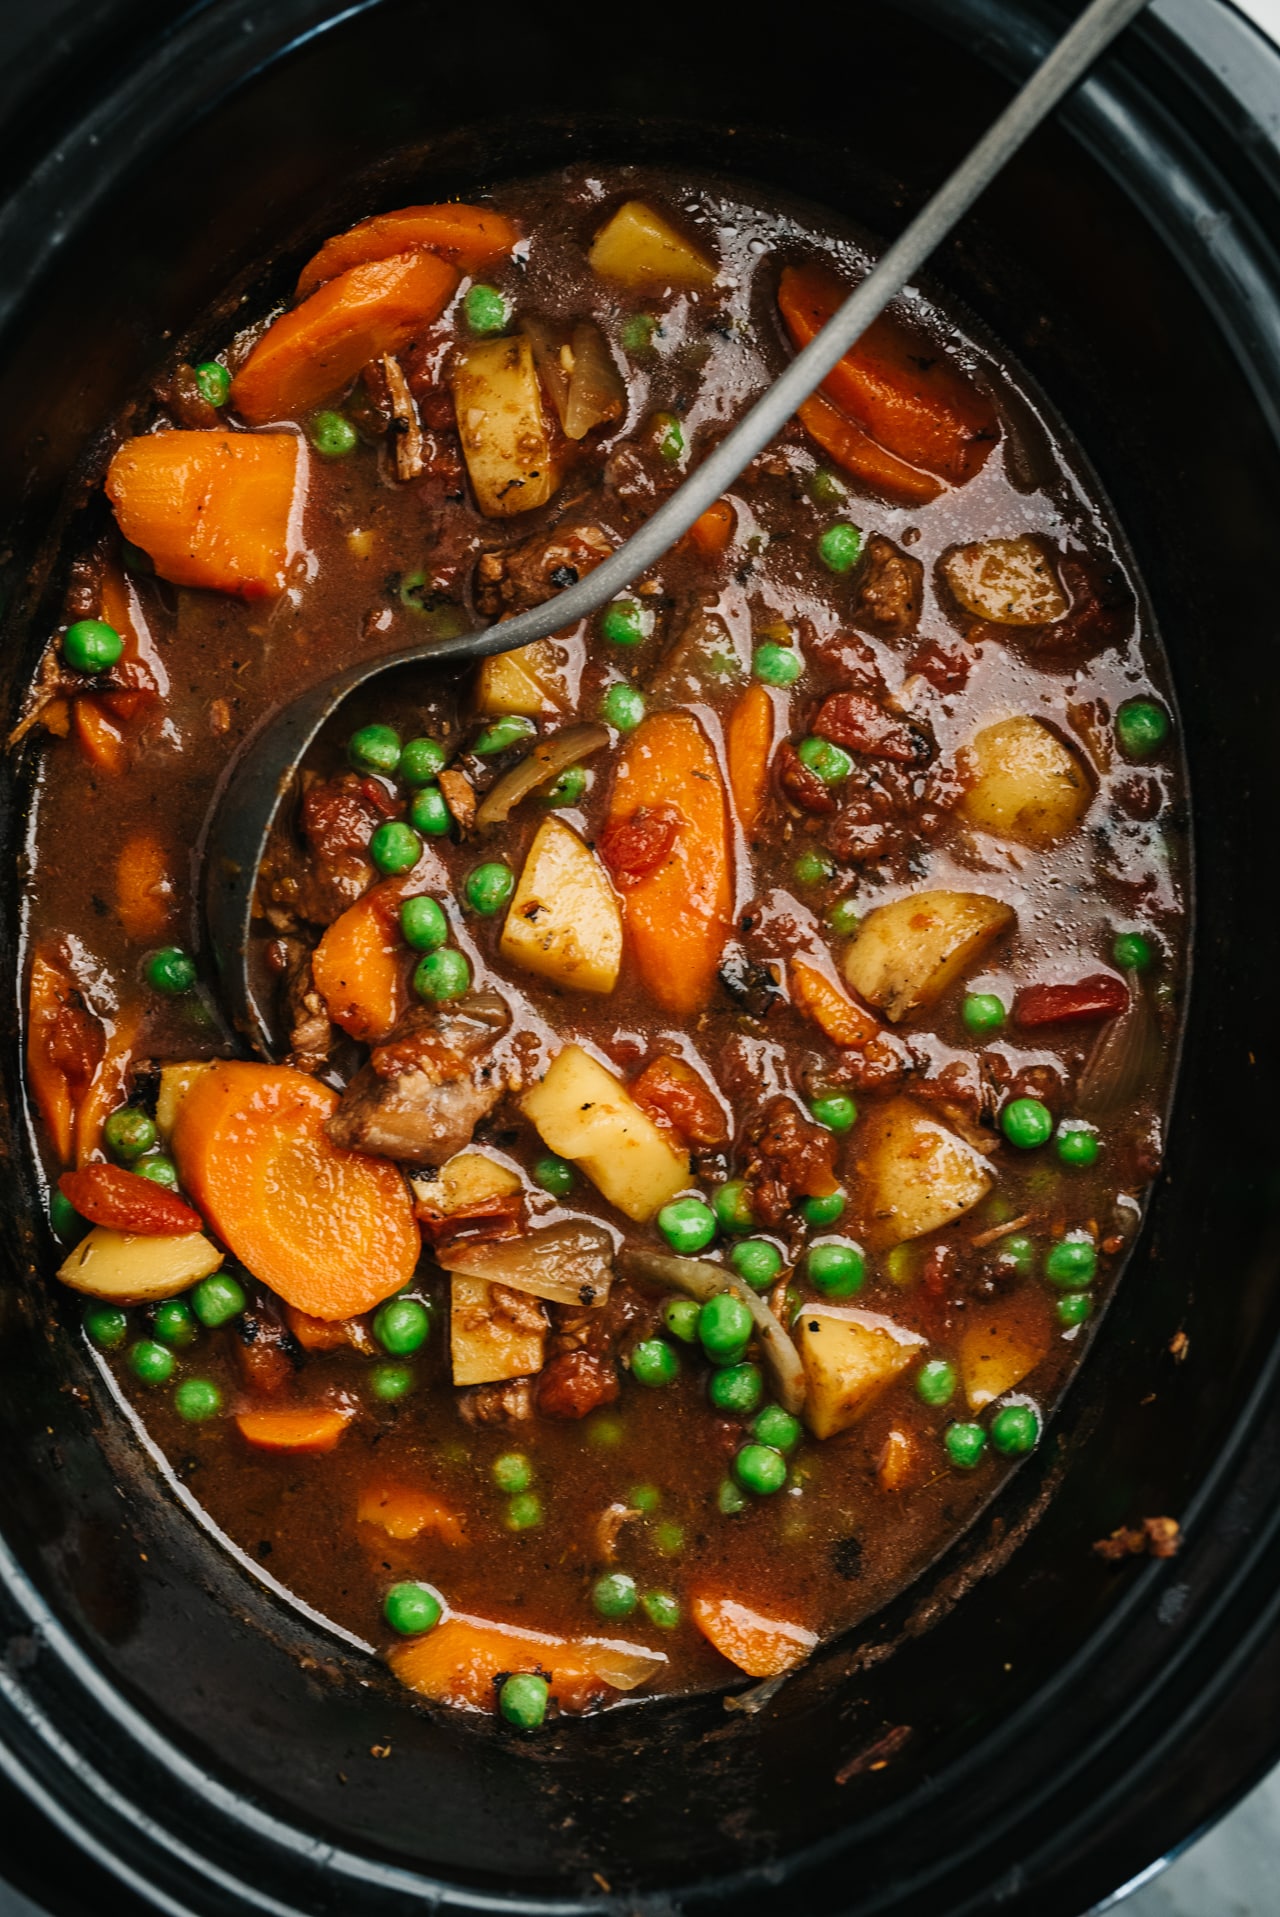 Homemade Vegetable Beef Soup is an easy, delicious, satisfying meal!